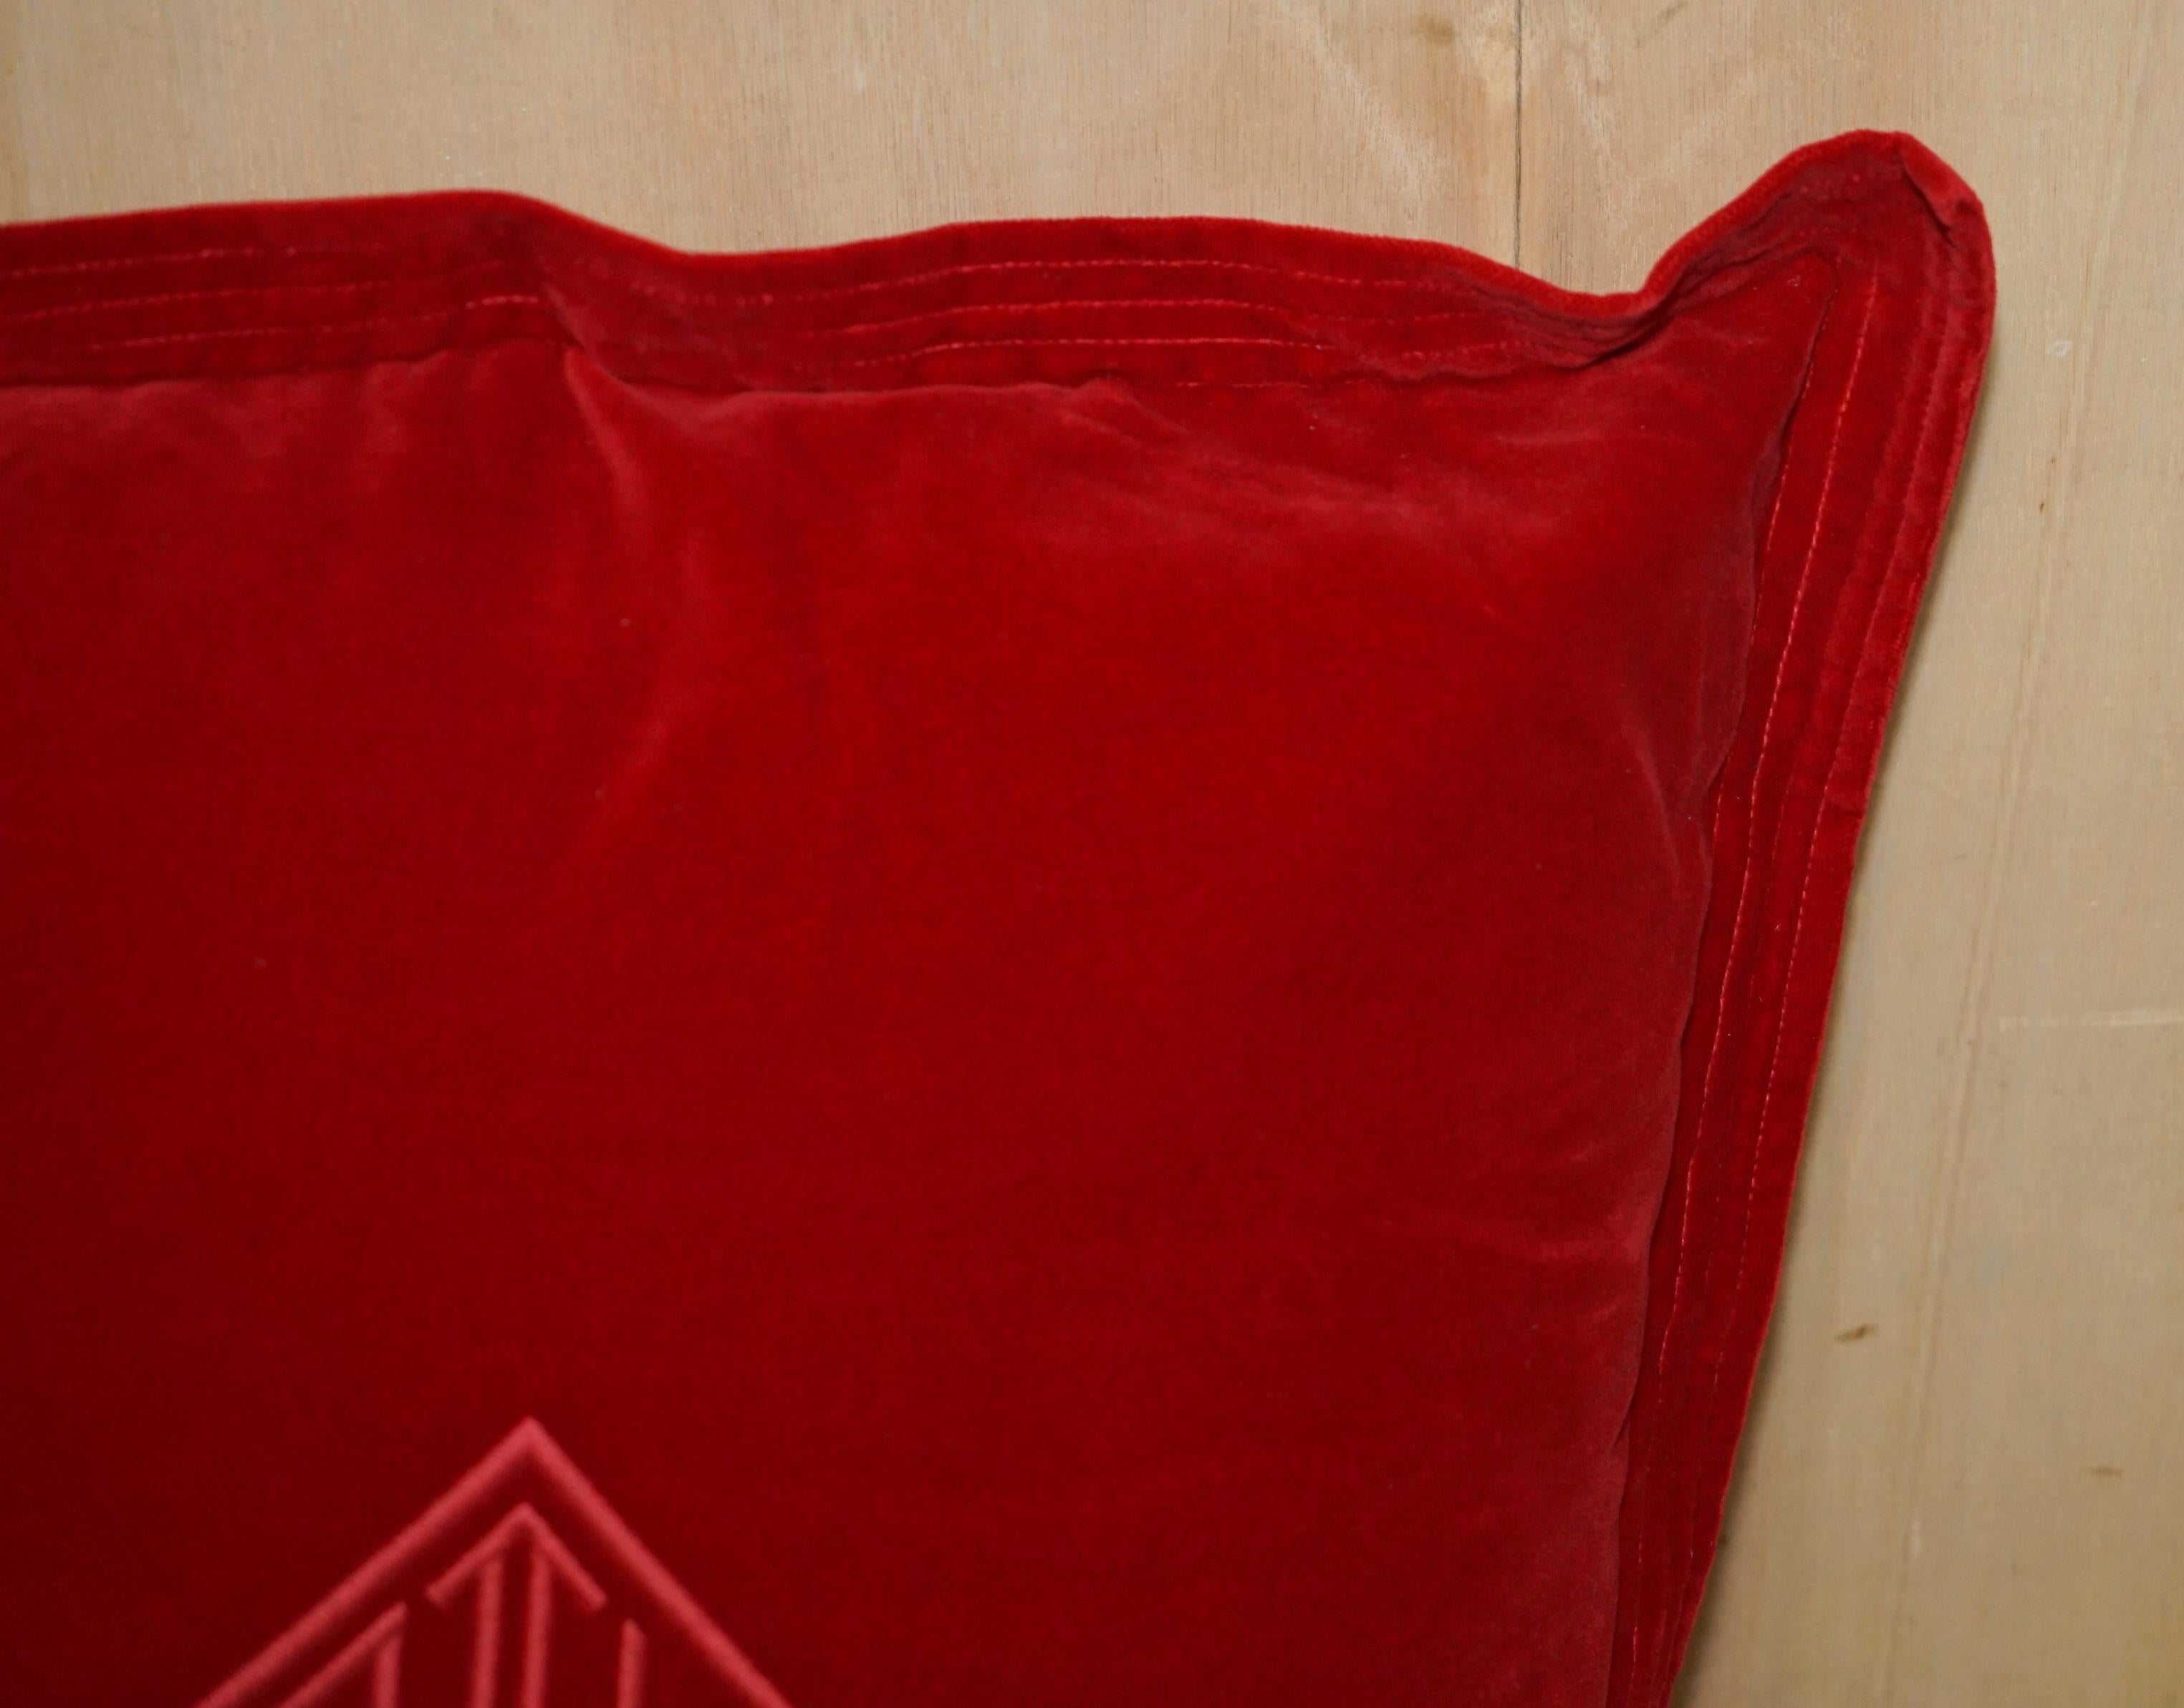 PAIR OF BRAND NEW FEATHER INTERNALS RALPH LAUREN RED SOFA CUSHiONS PART SUITE 7